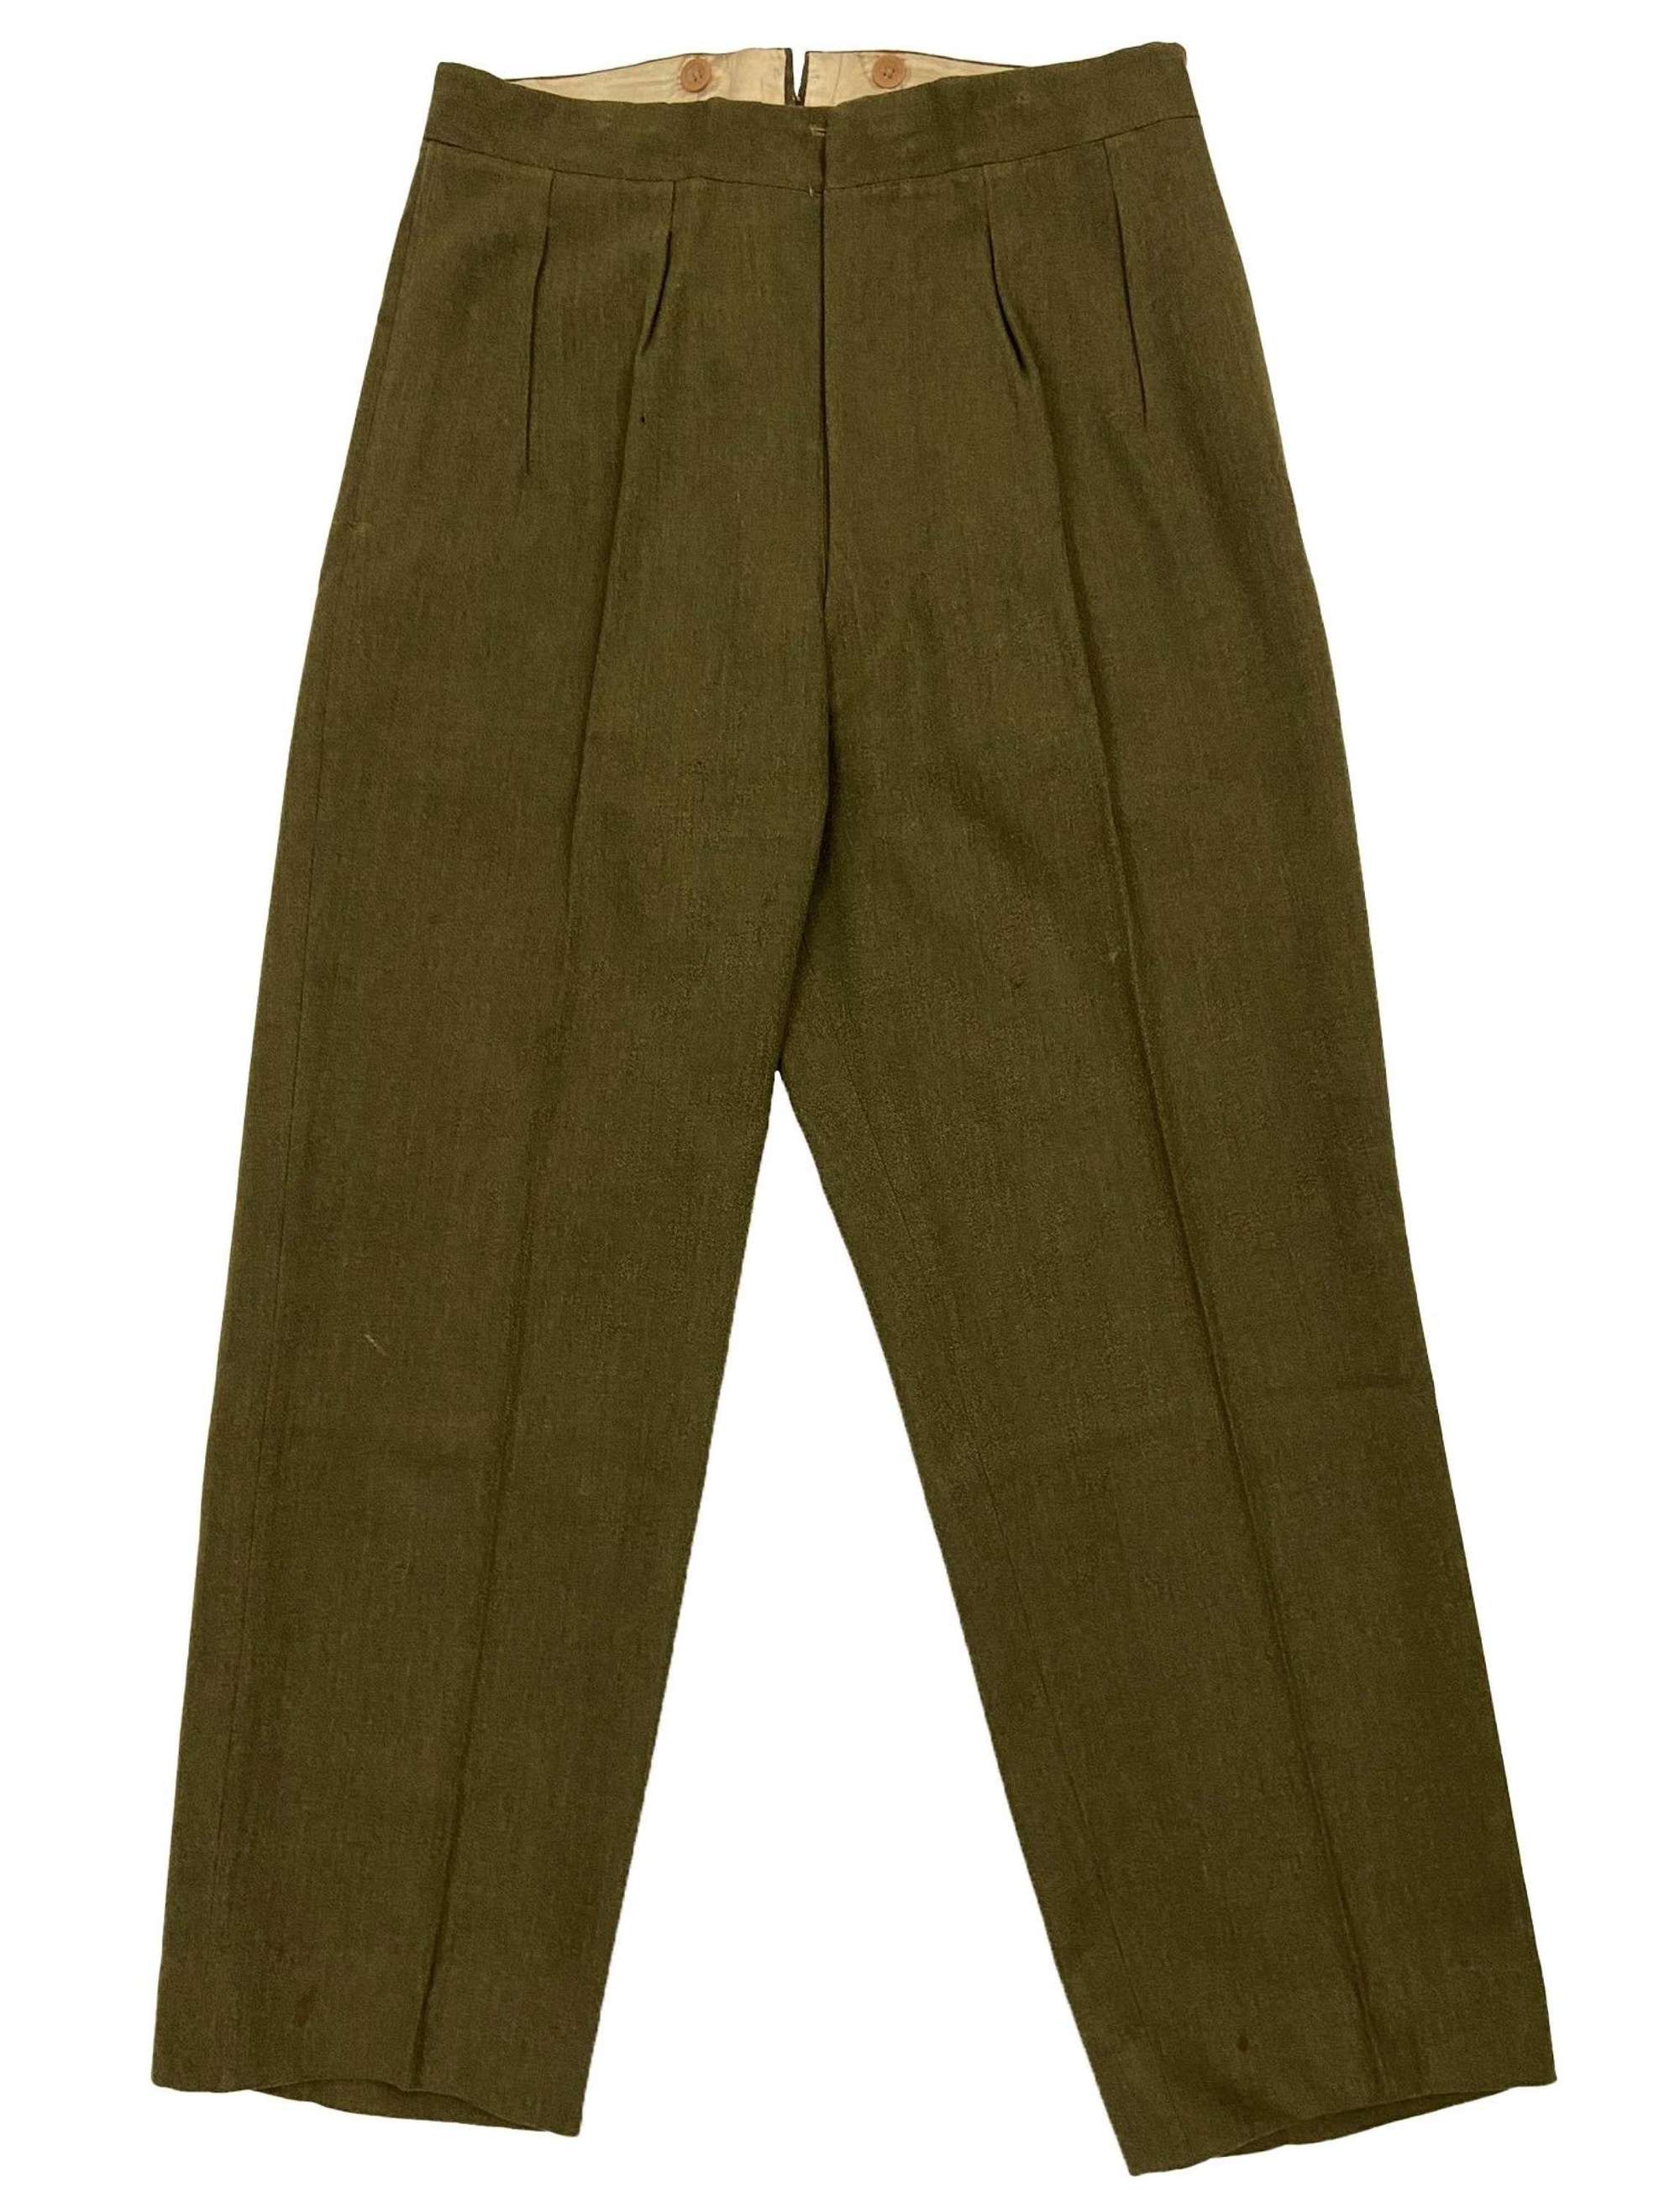 Original 1940s British Army Officers Service Dress Trousers